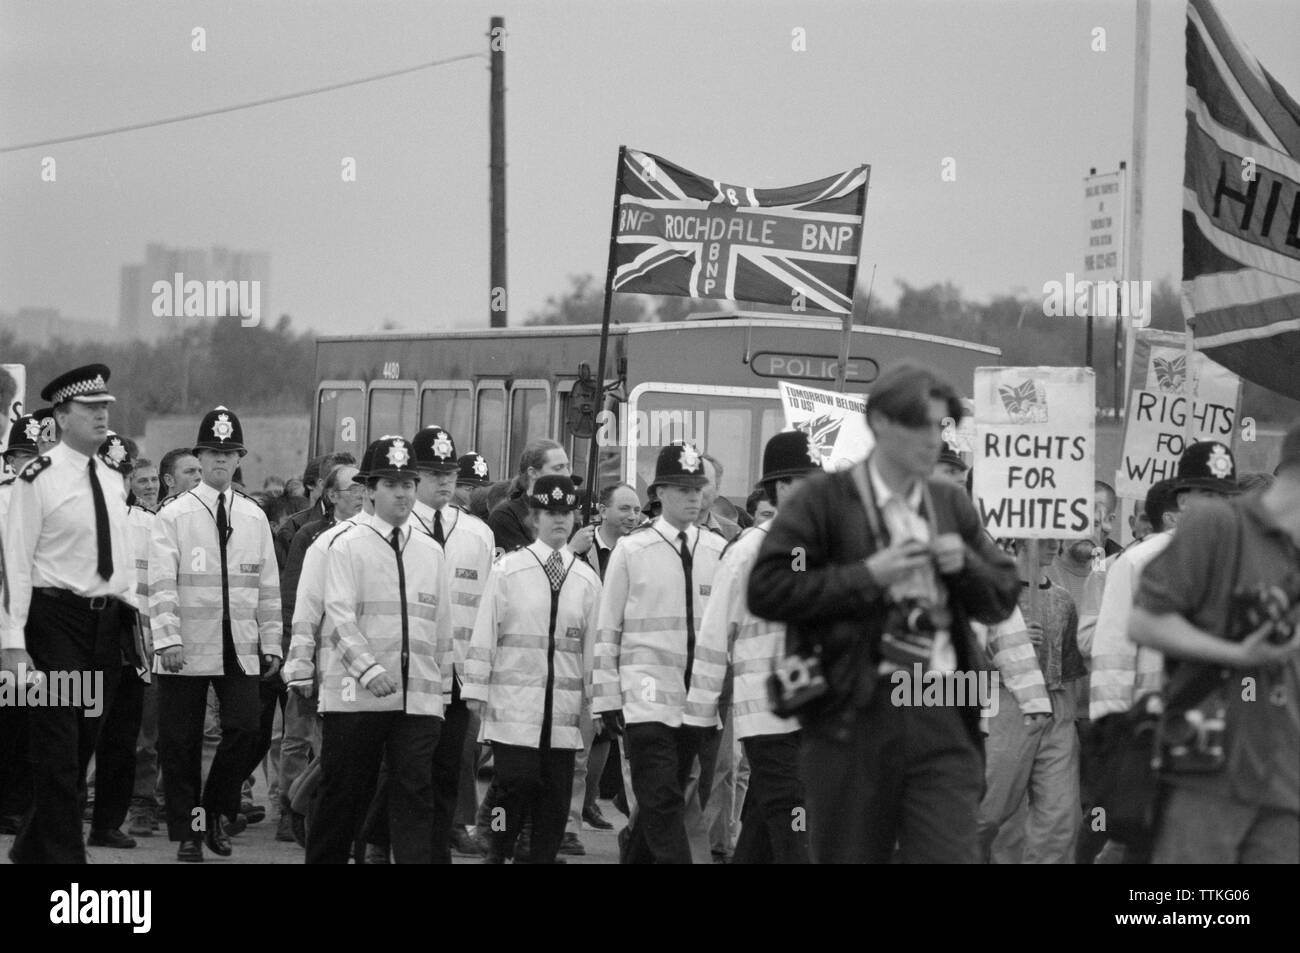 A demonstration march in East London, England, held by the BNP, British National Party, a far right political party active from 1982 until the present day. A banner from the Rochdale British National Party can be seen. Stock Photo